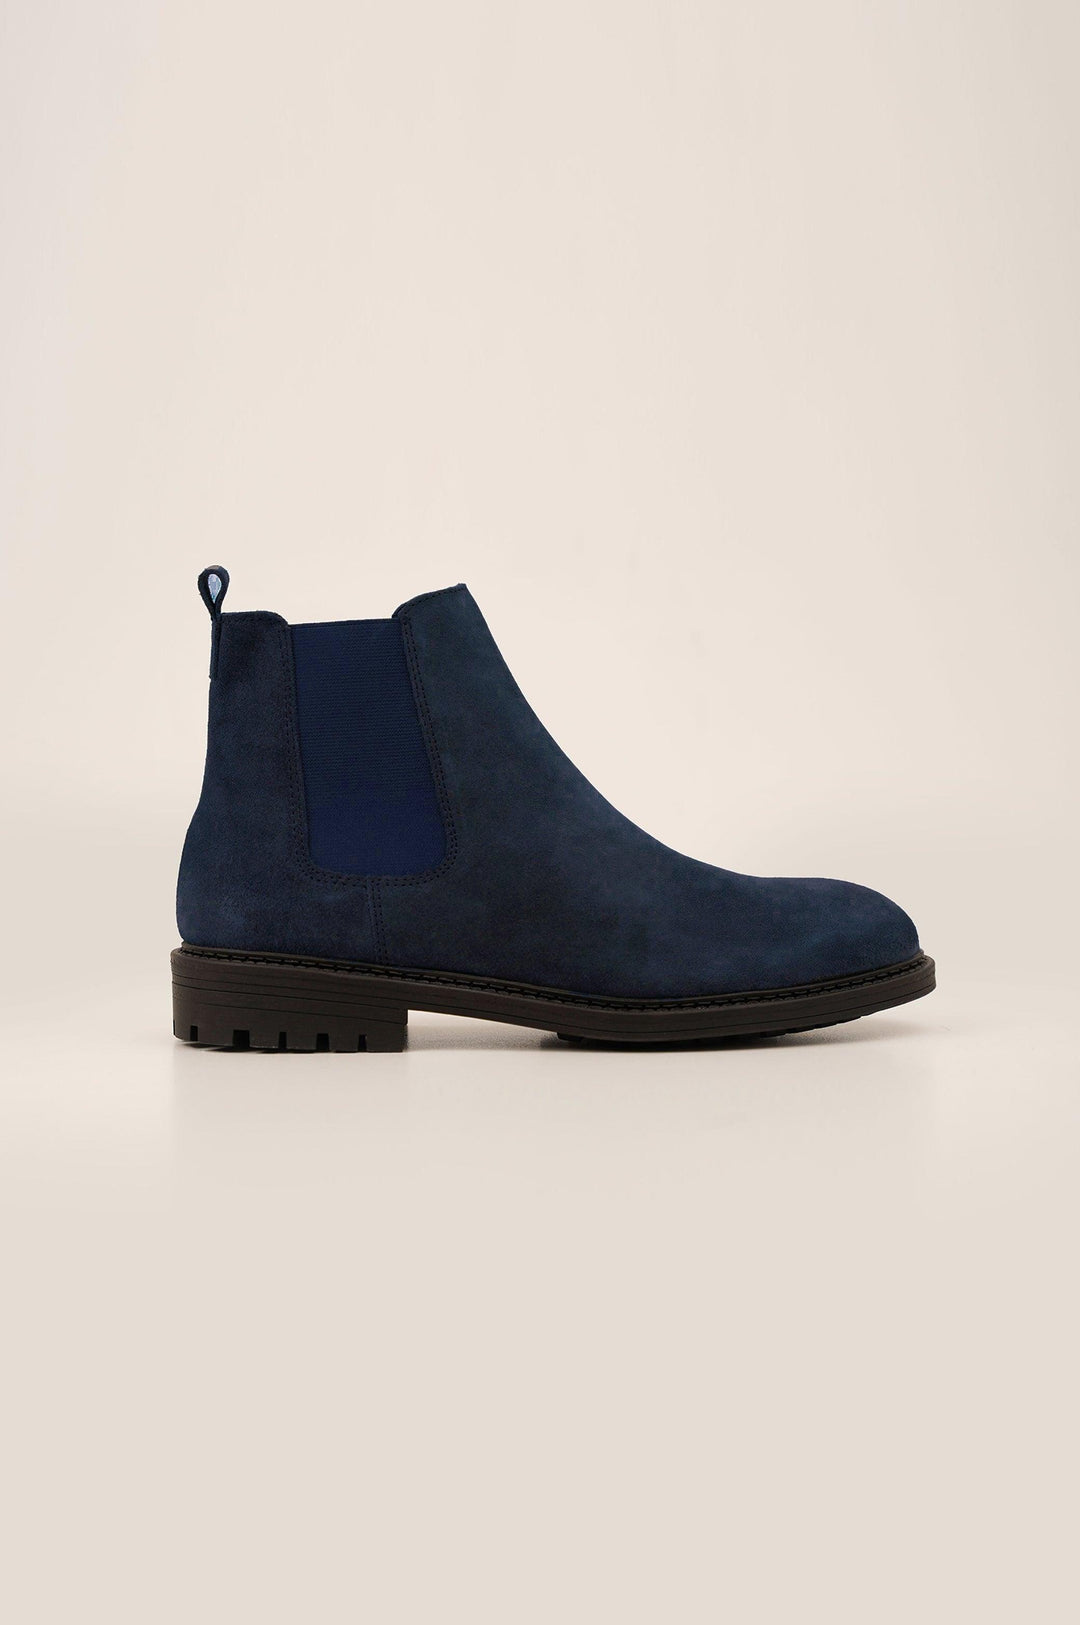 BUDDY CHELSEA BOOT - CHELSEA BOOTS